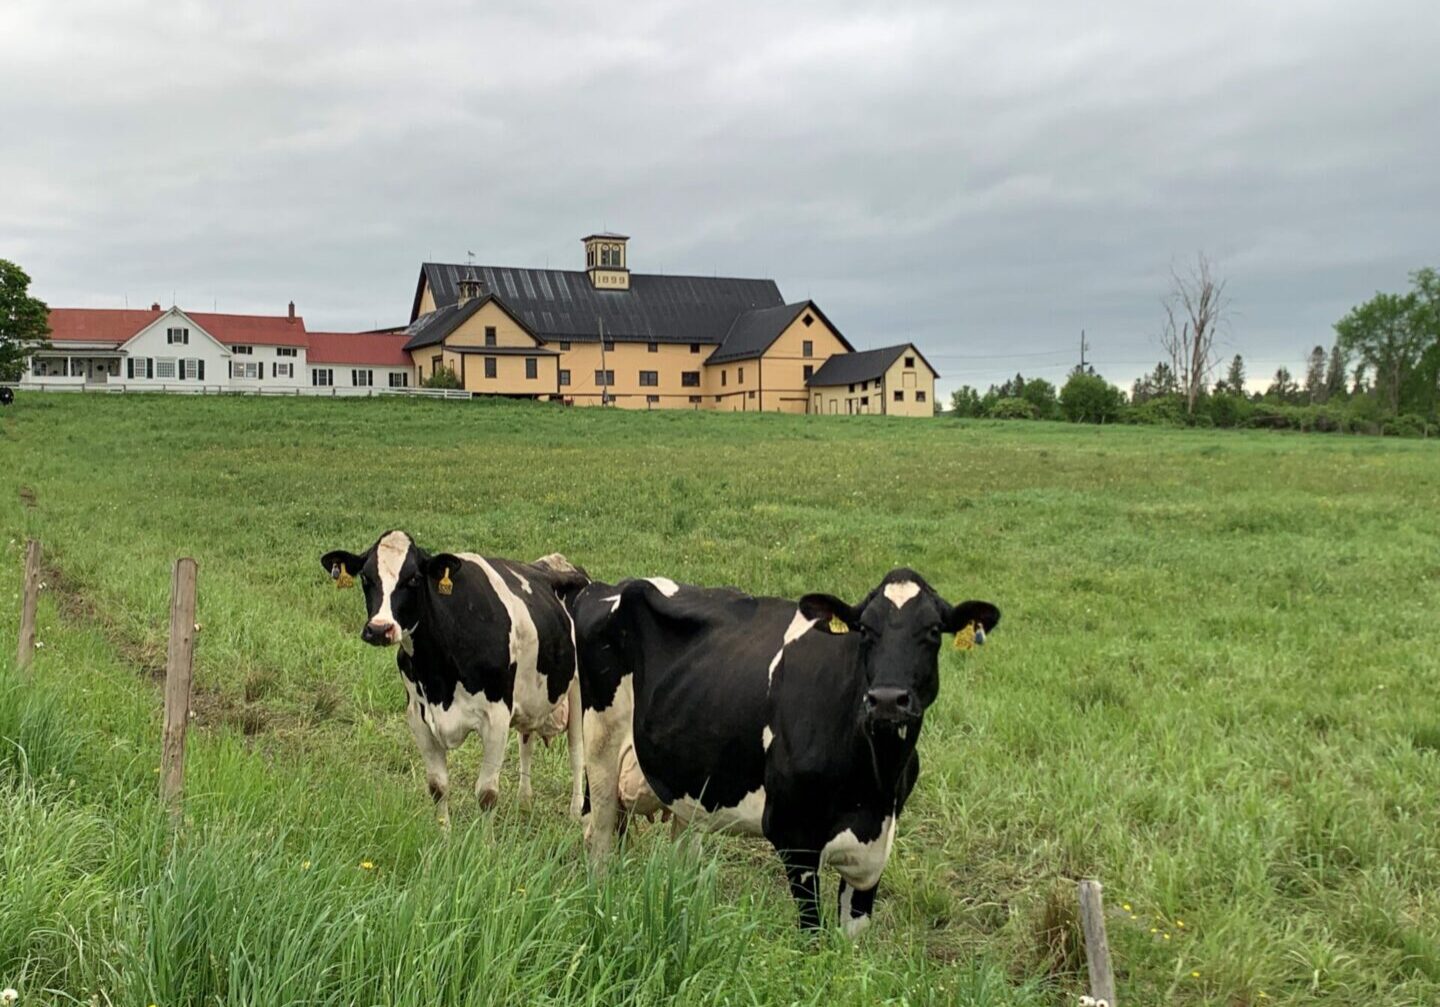 Two cows in a field with a house in the background.